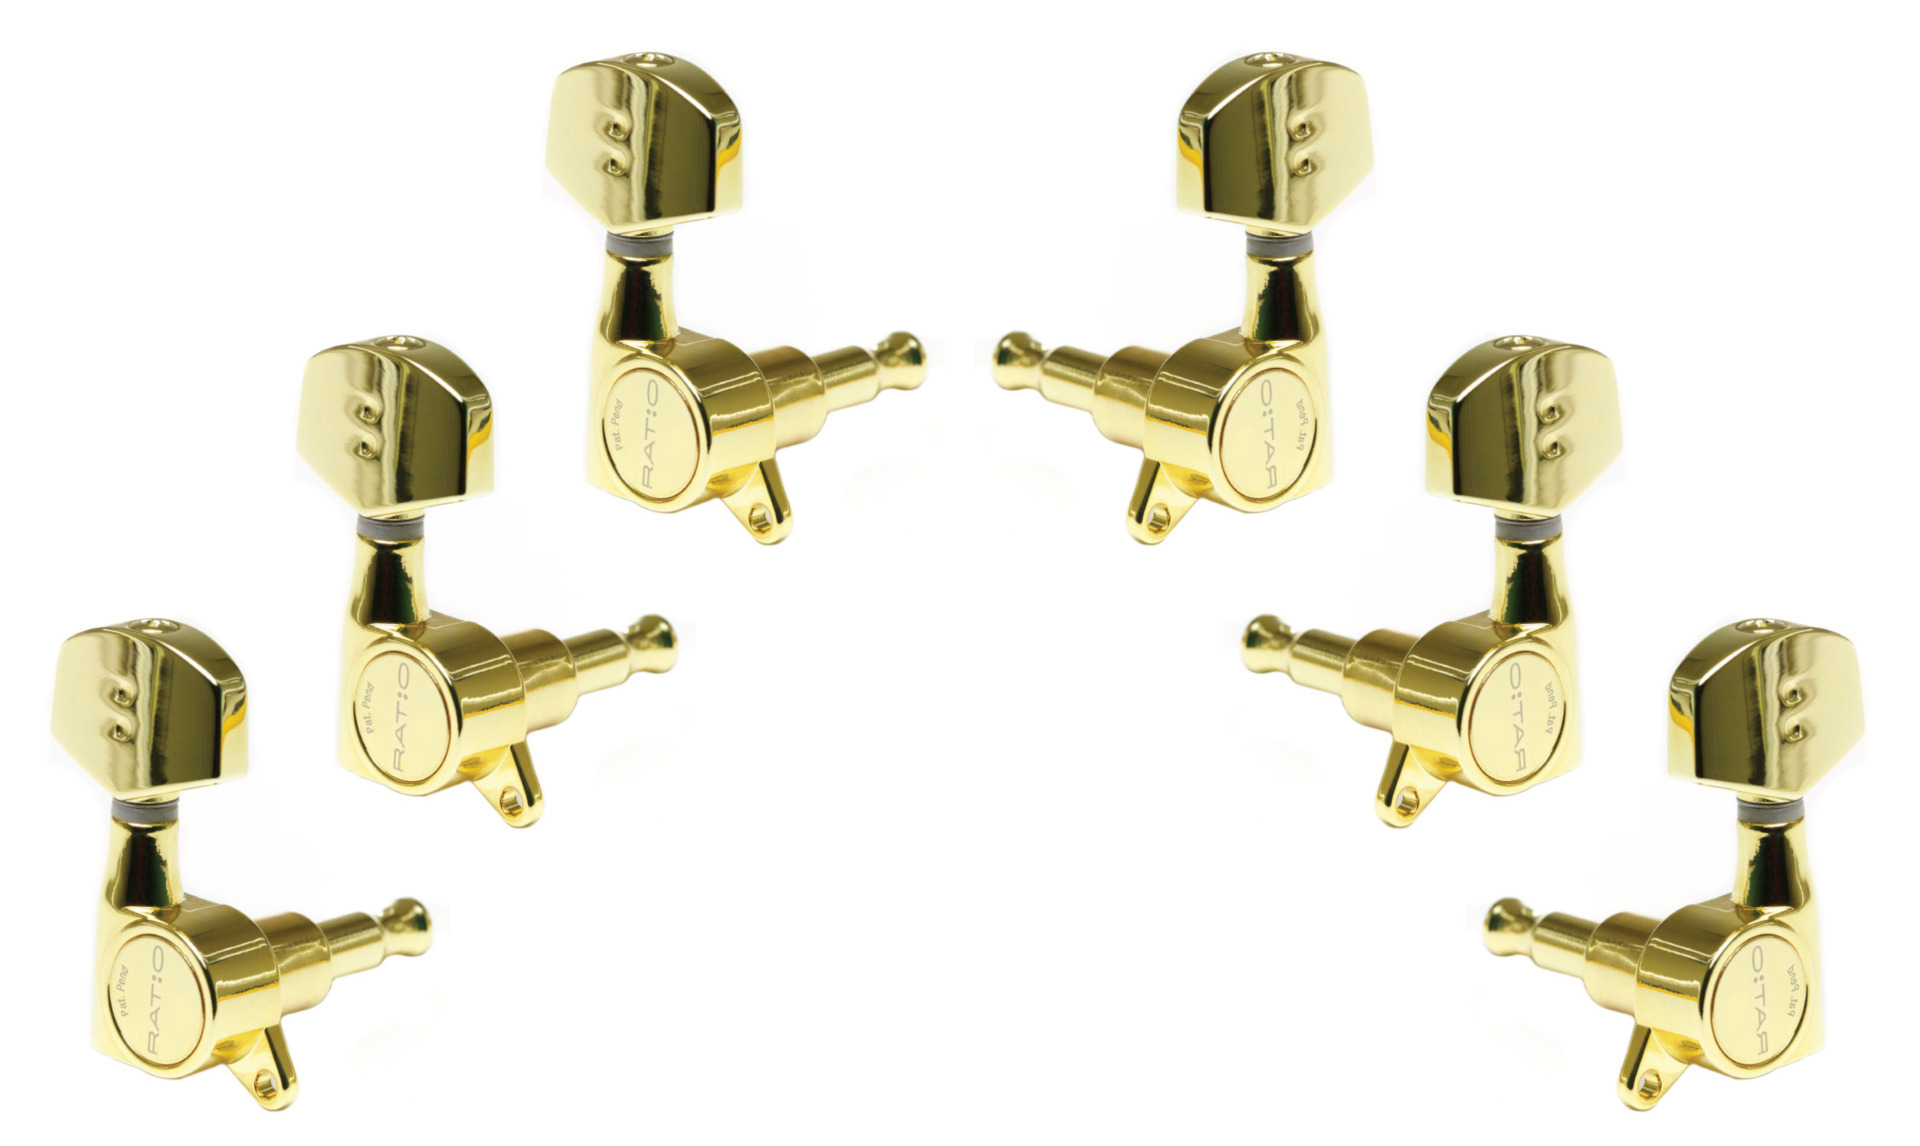 Graph Tech PRN-4411-G0 Ratio Acoustic Guitar Machine Heads with Contemporary Button, Offset Screw - 3 + 3 - Gold